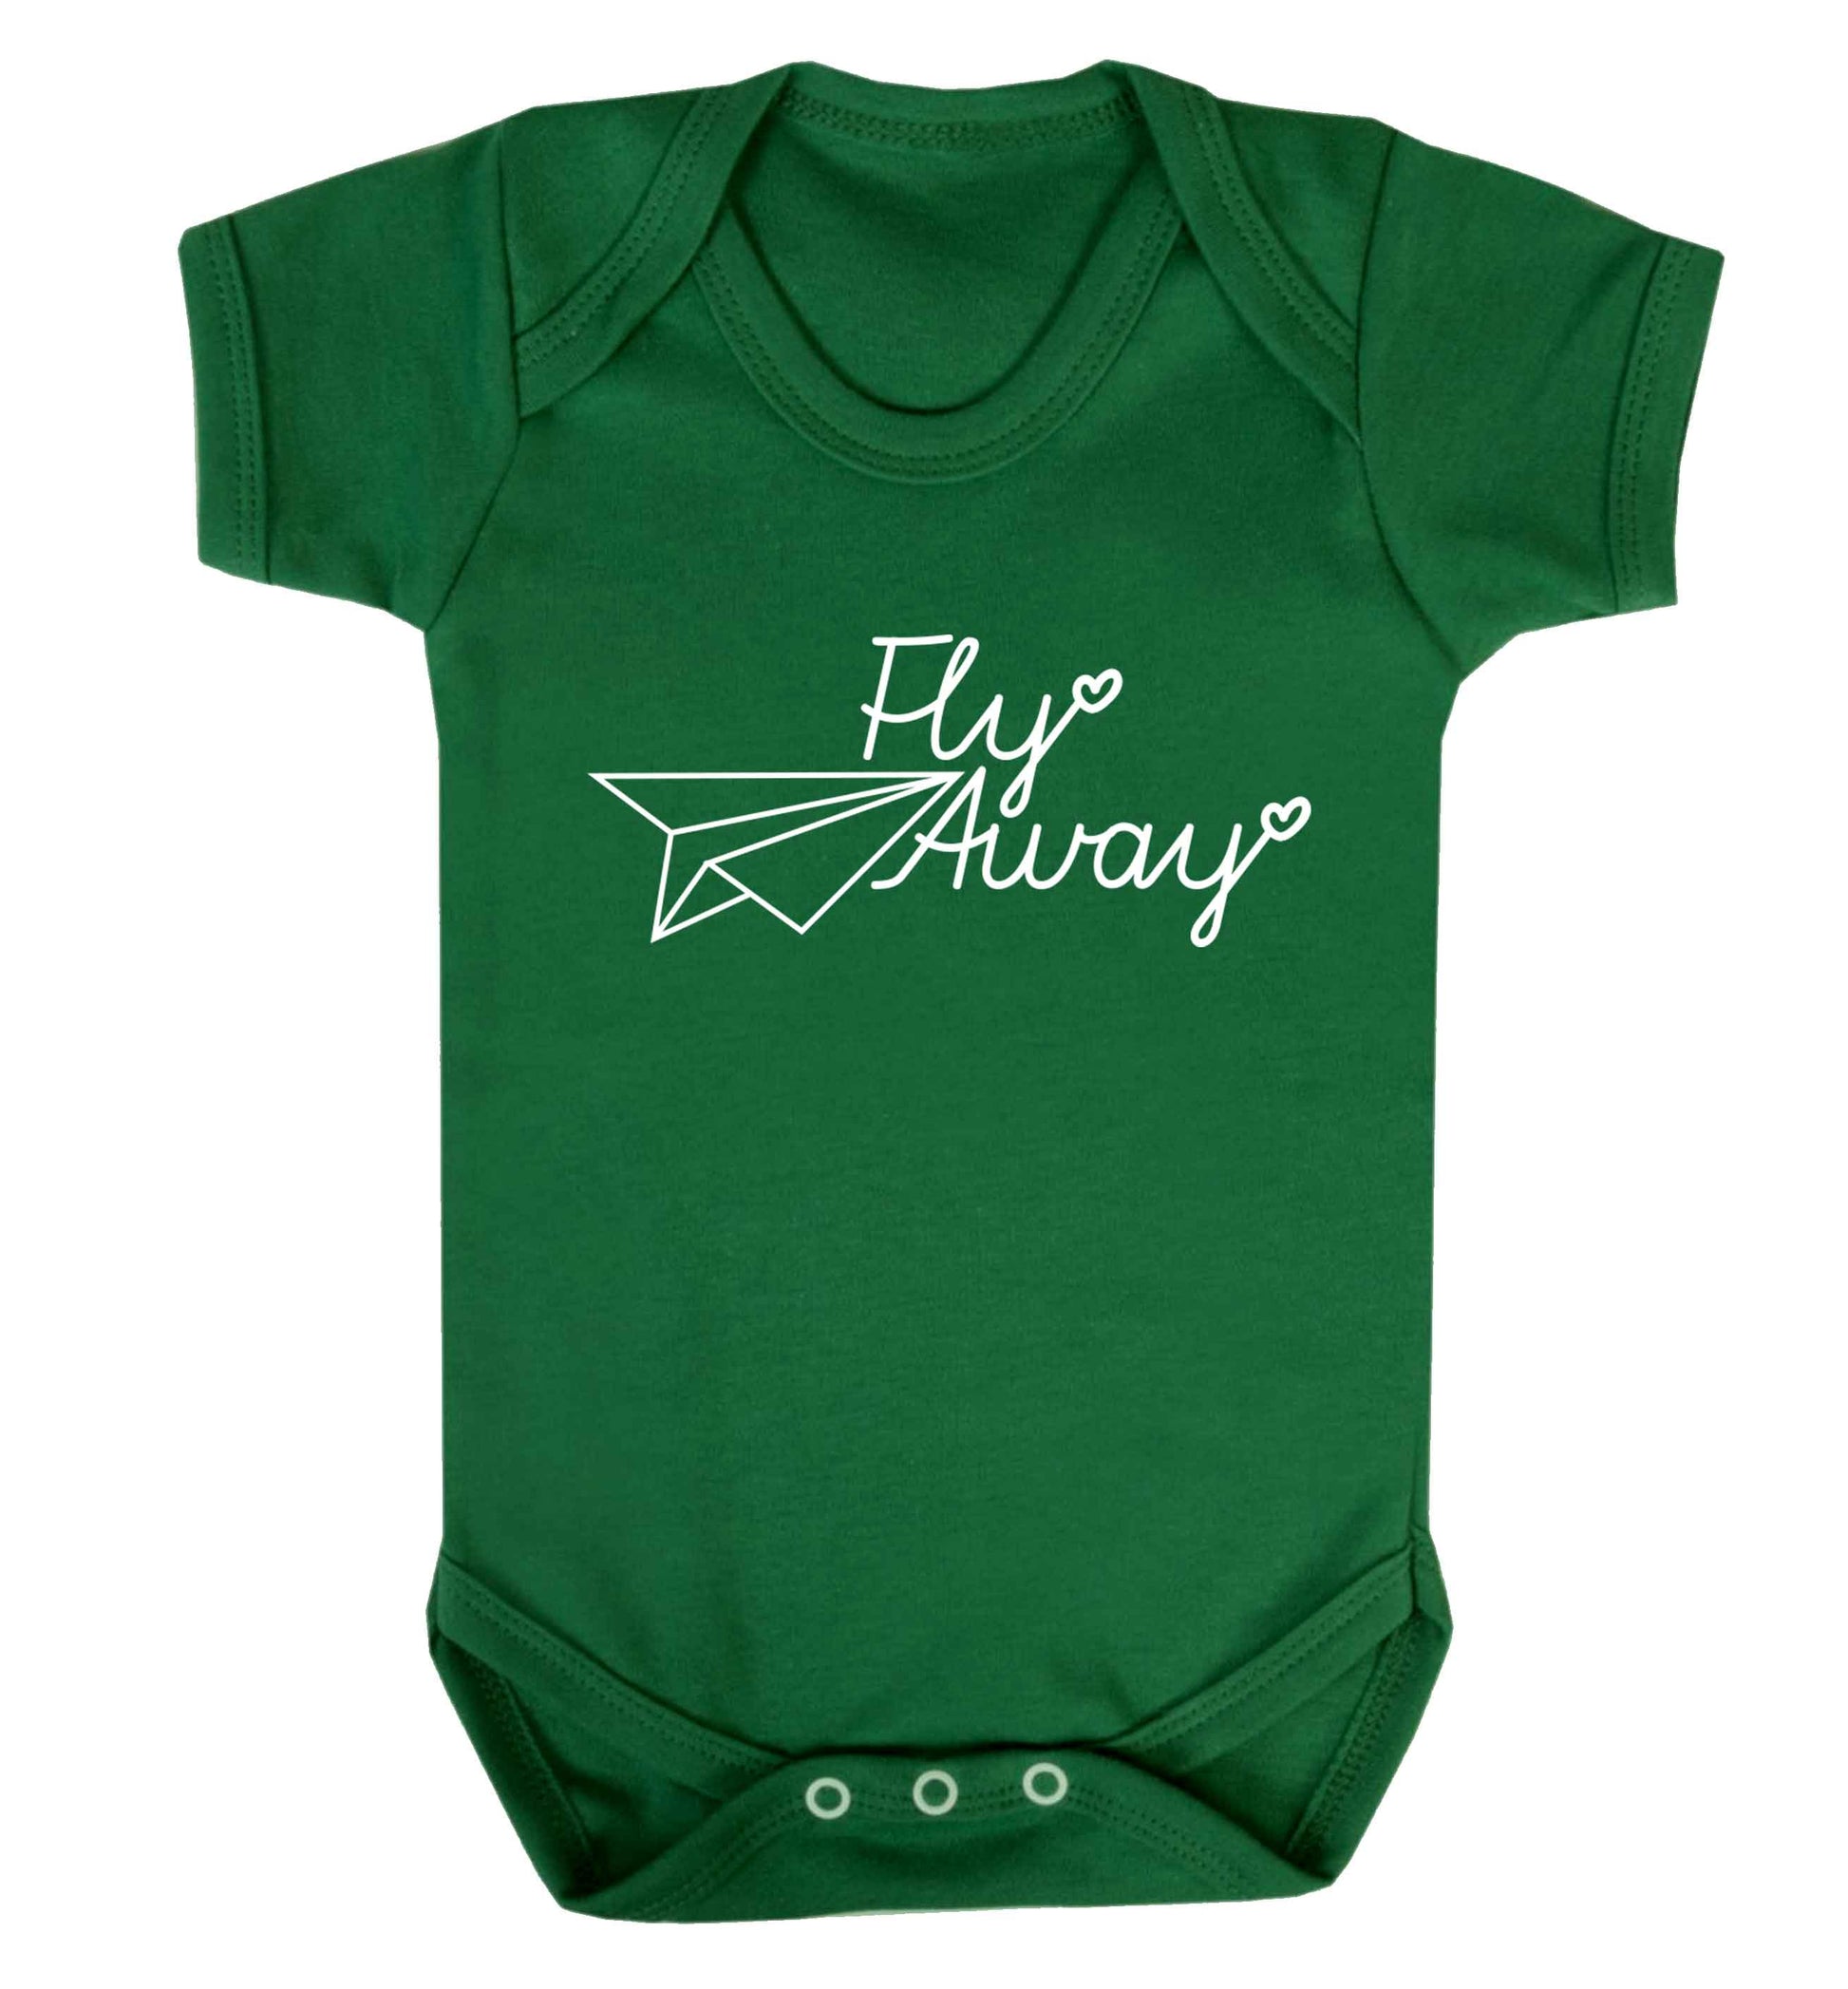 Fly away Baby Vest green 18-24 months